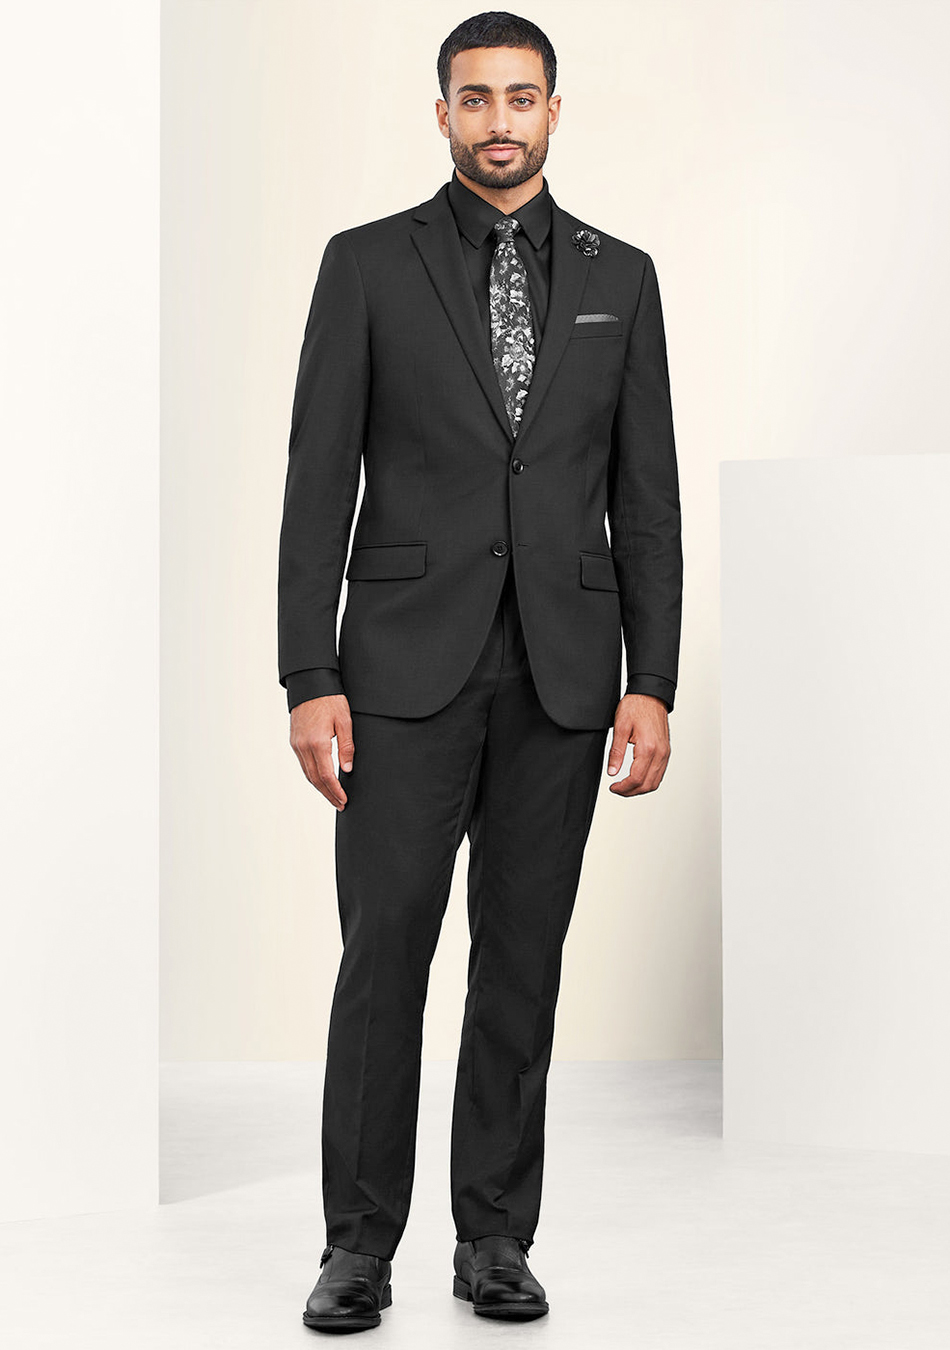 Black Suit Color Combinations with Shirt and Tie